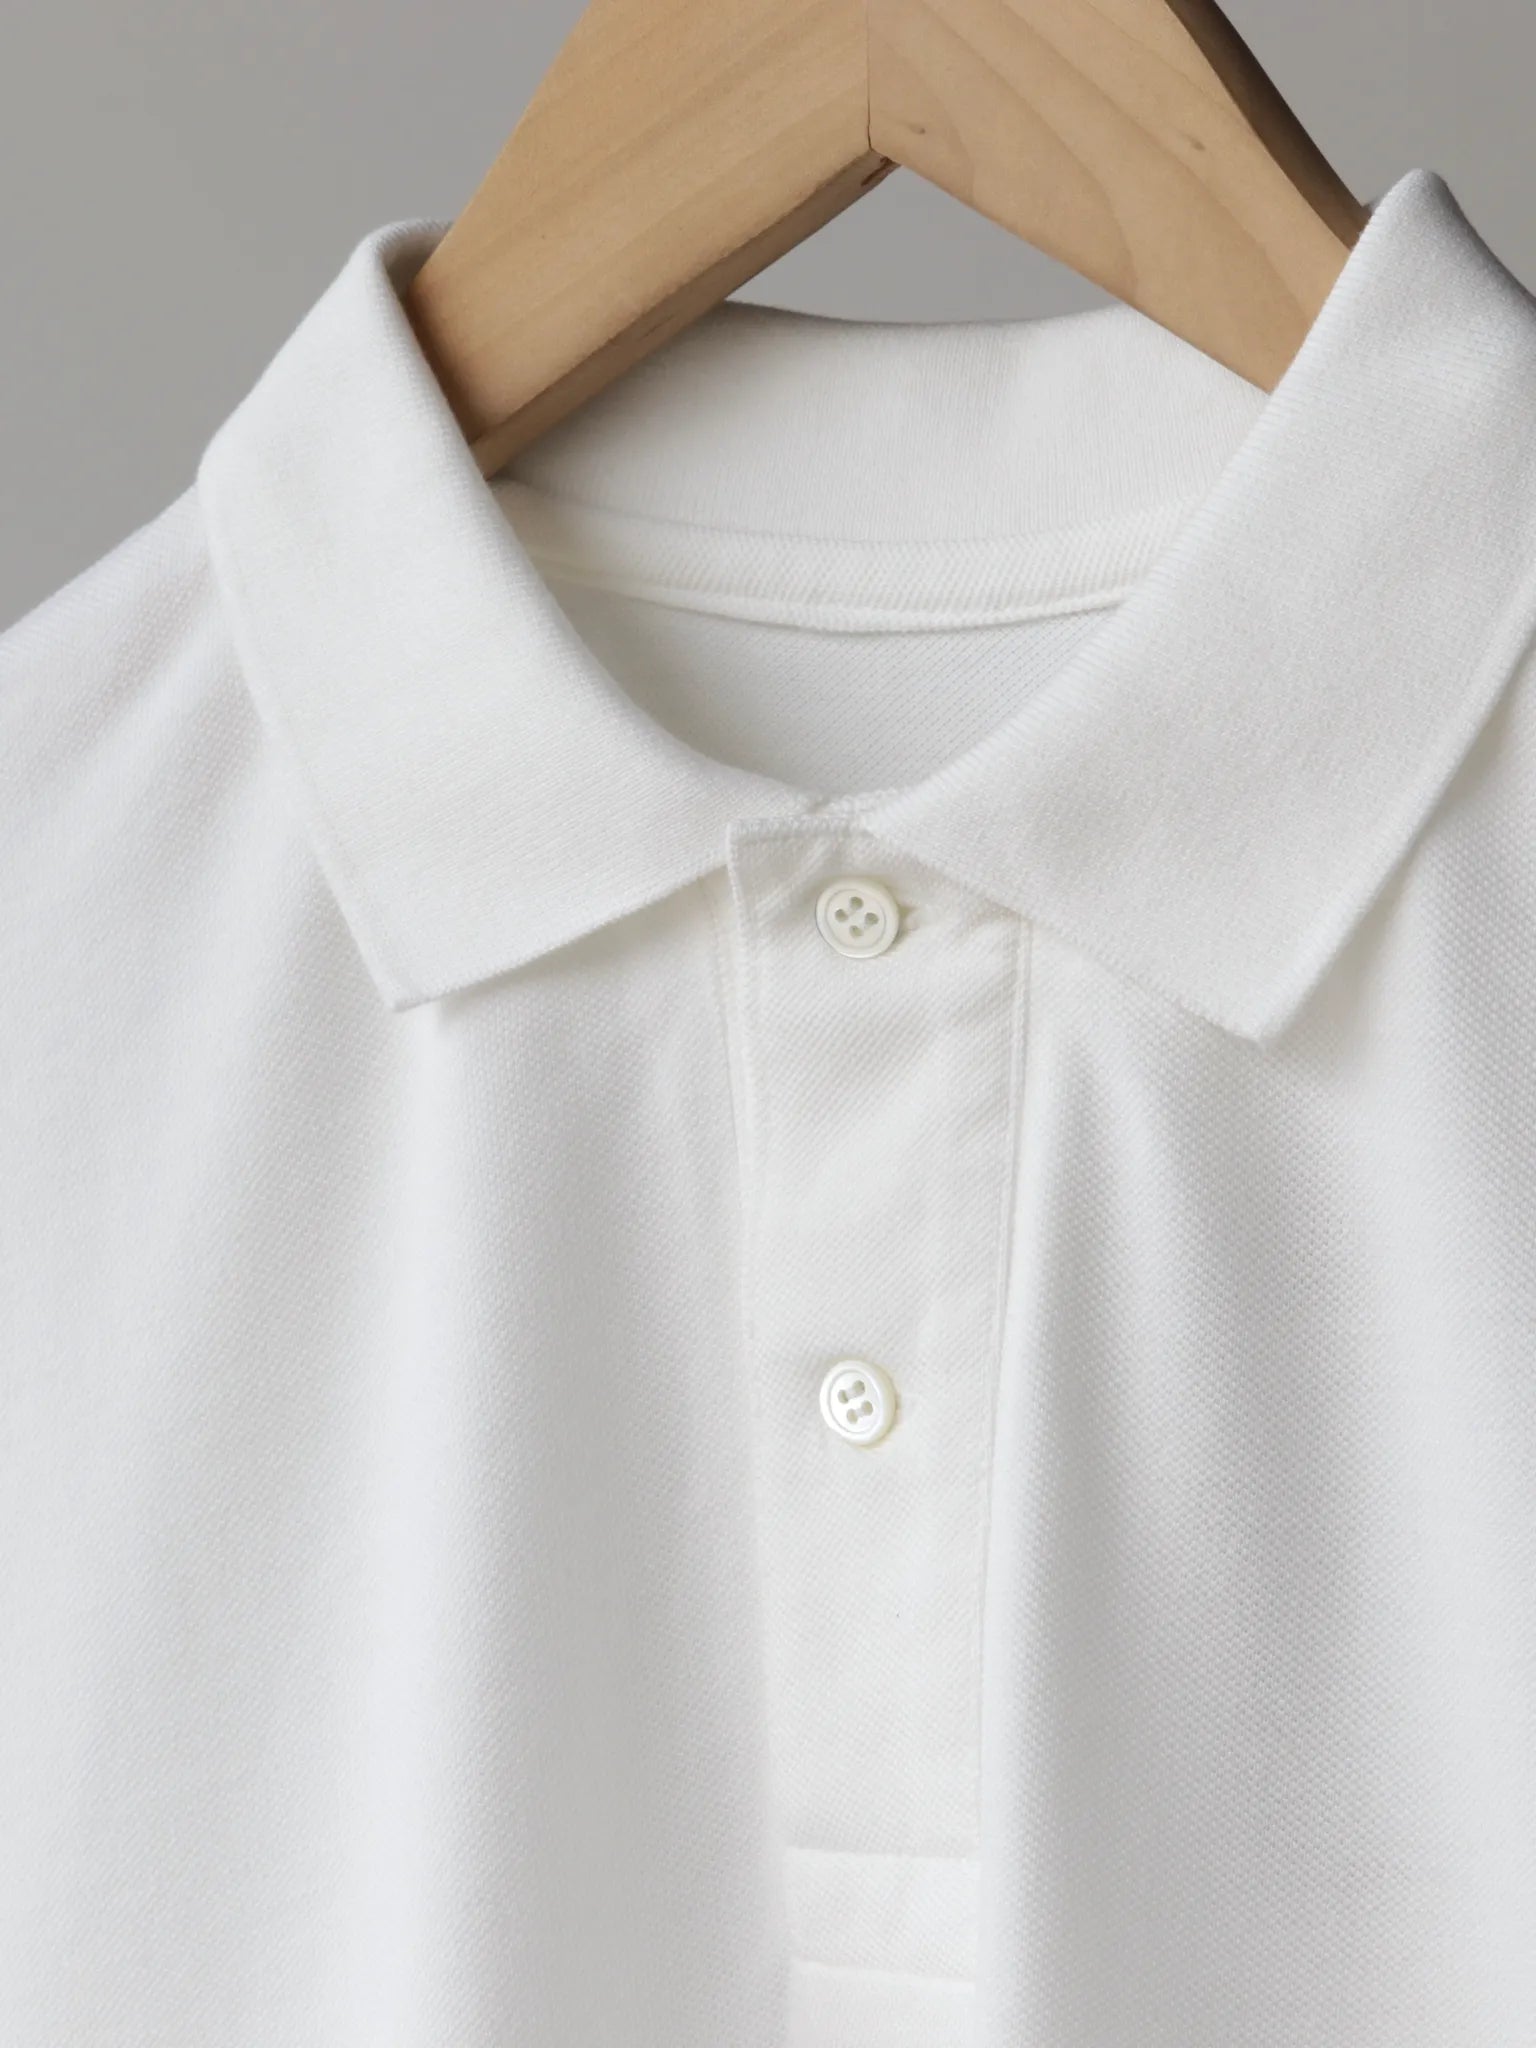 the-inoue-brothers-poloshirt-whit-3